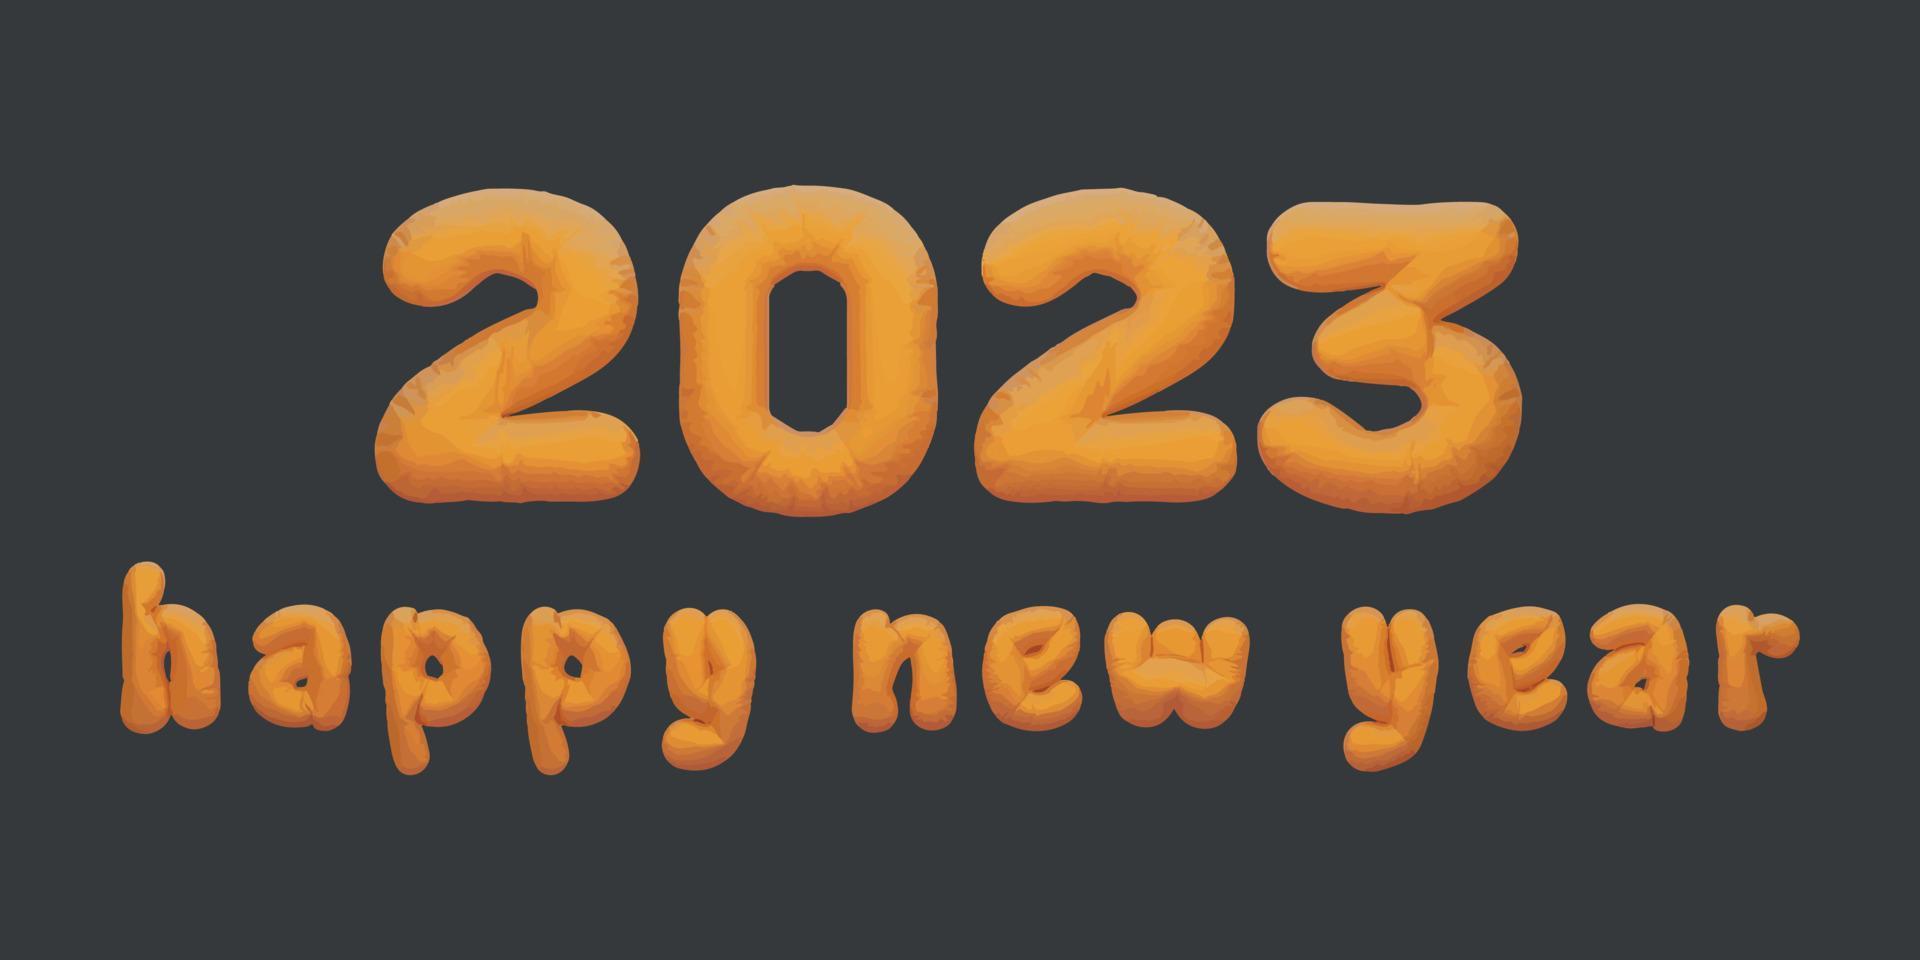 2023 happy new year lowercase. golden inflatable Helium foil numbers bread balloons style.vector illustration eps10 vector